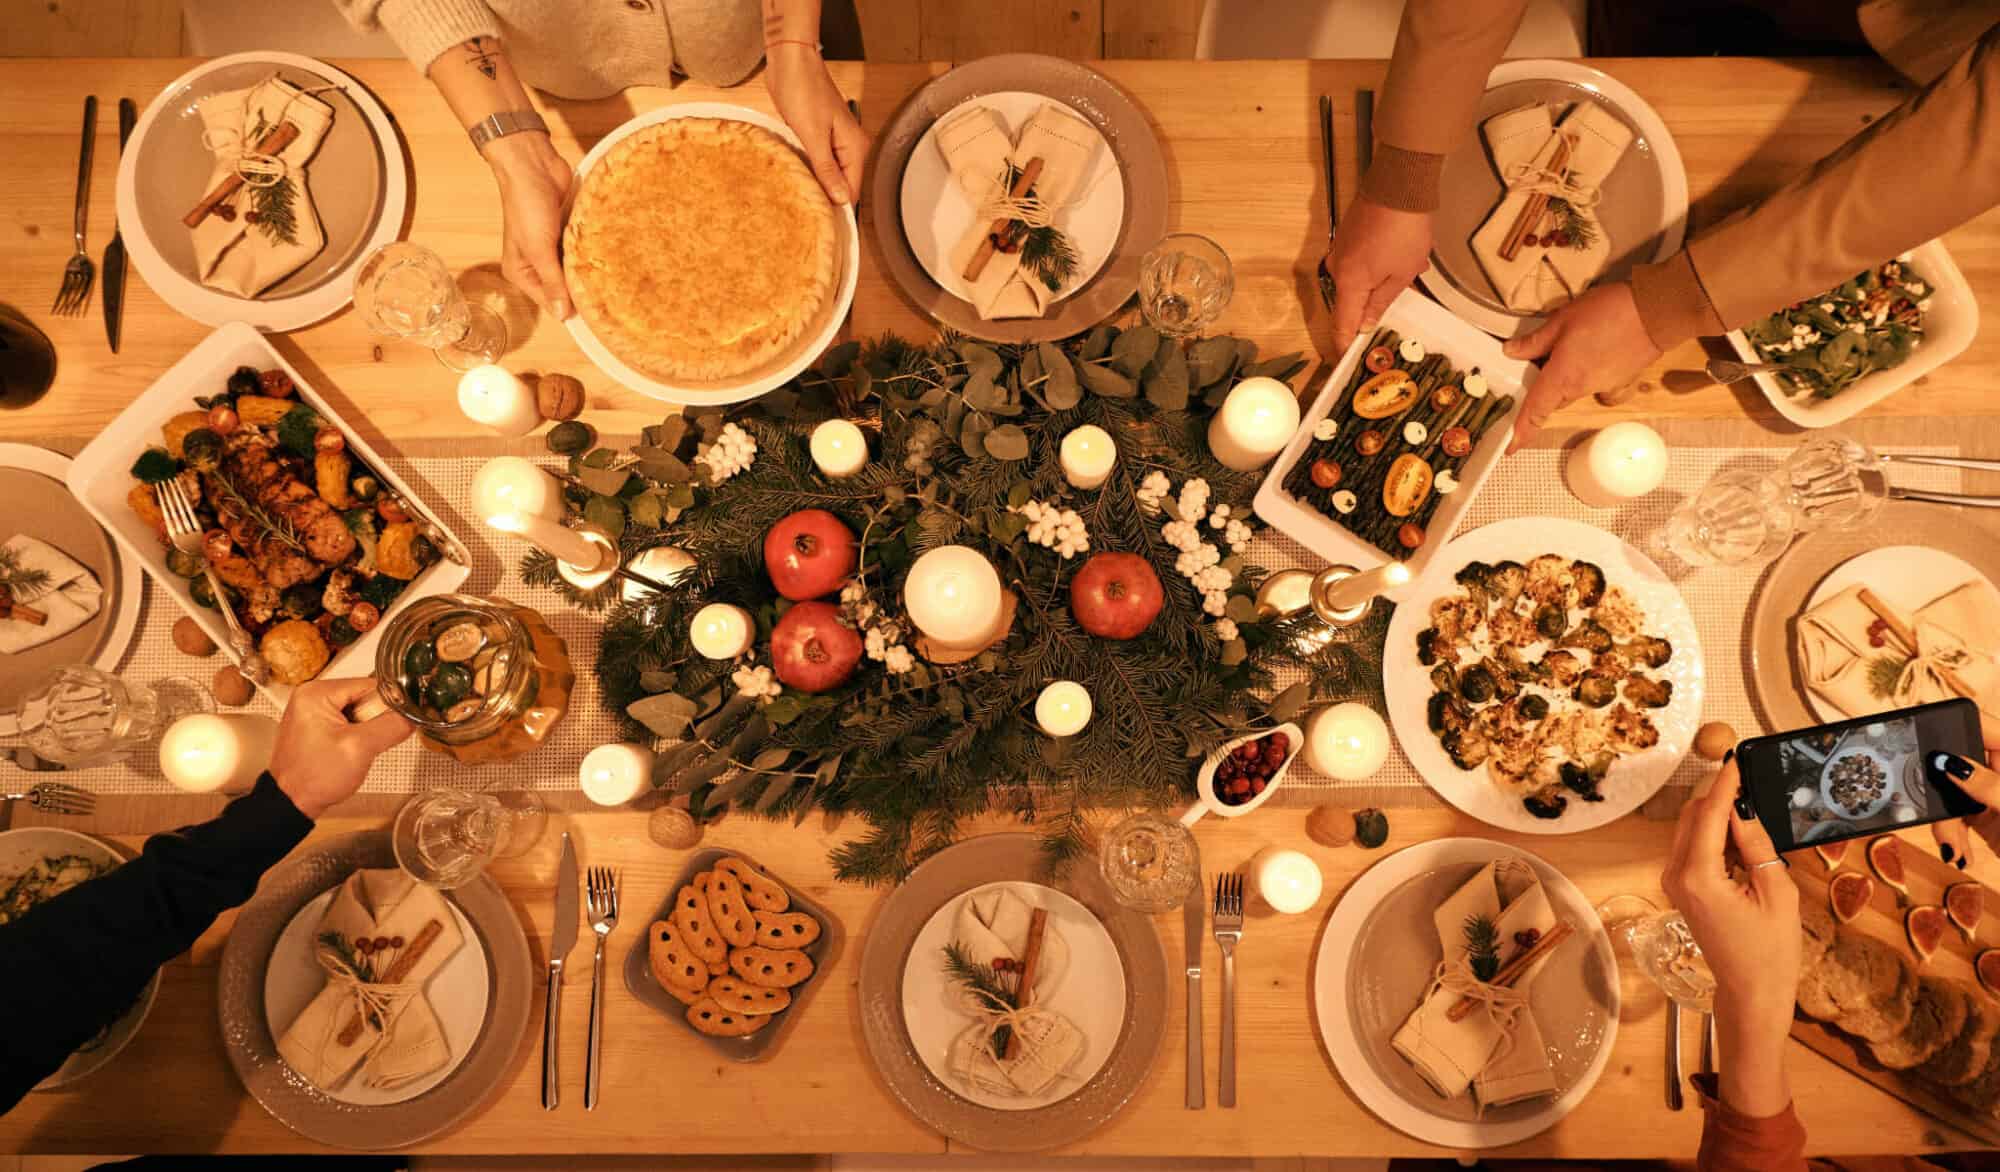 A dinner table for the holidays full of delicious dishes and winter decoration.